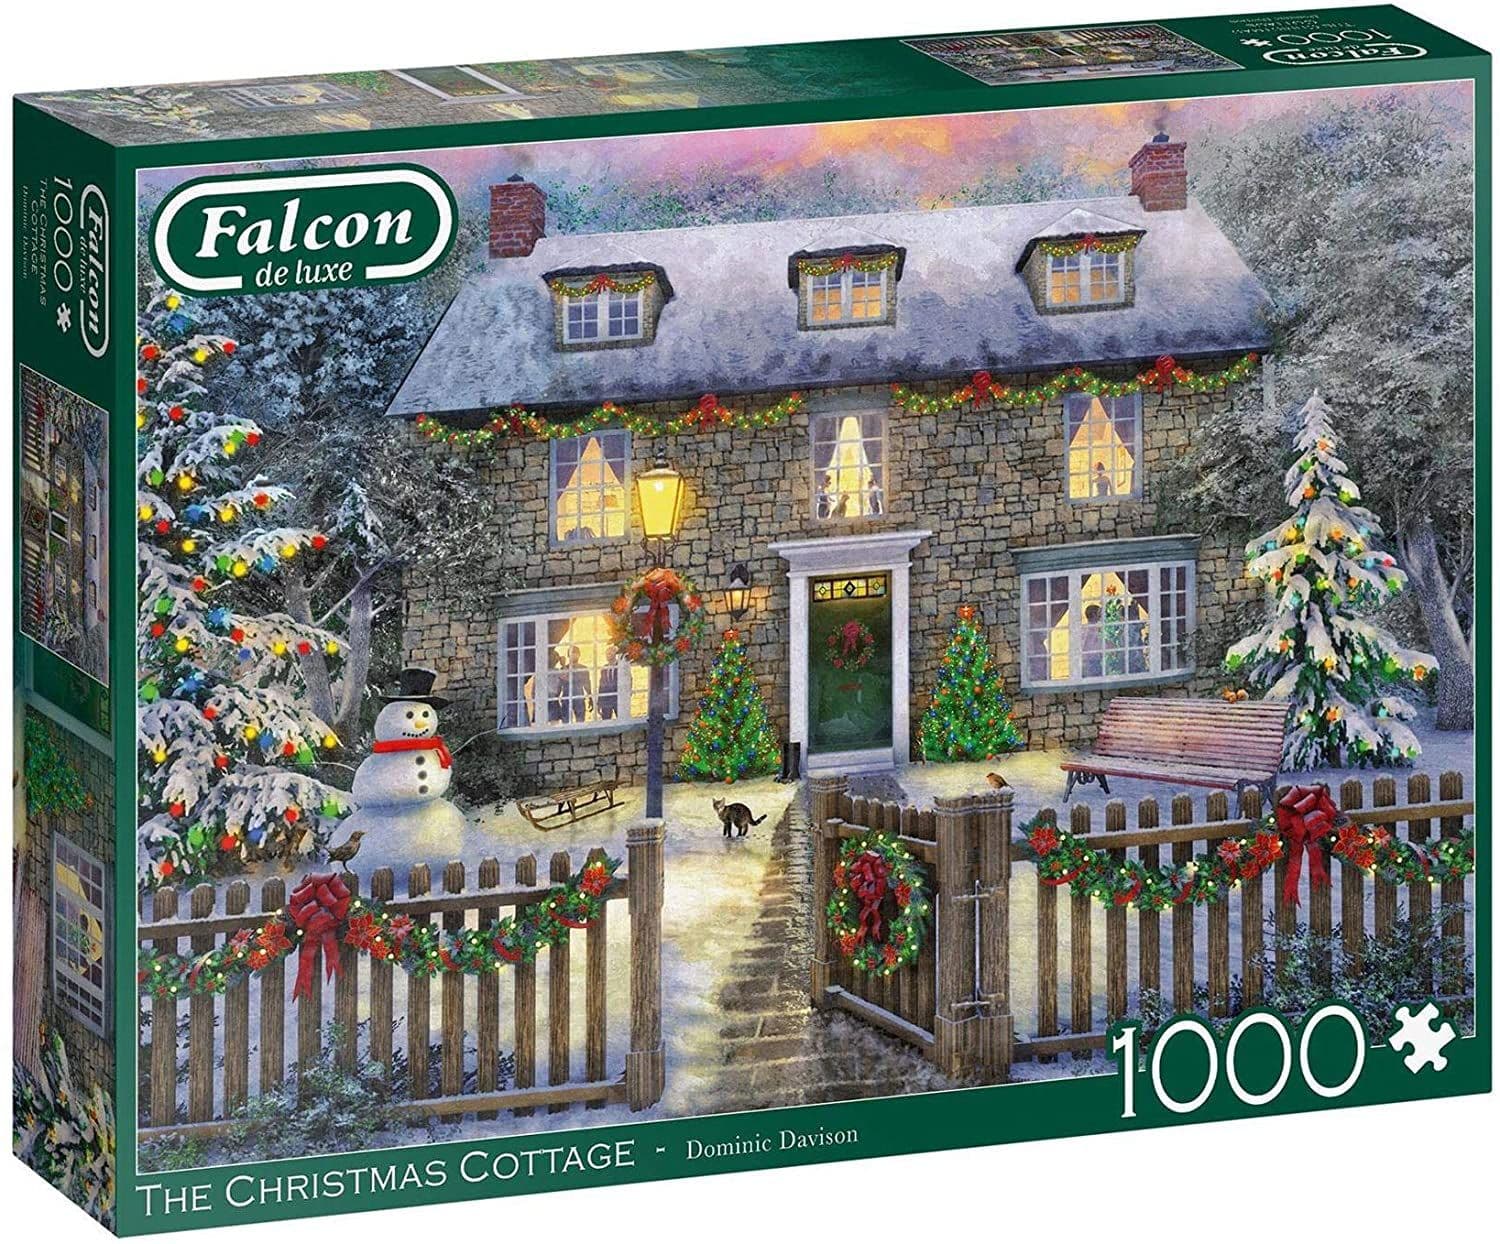 Buy Jigsaw Puzzles Deluxe